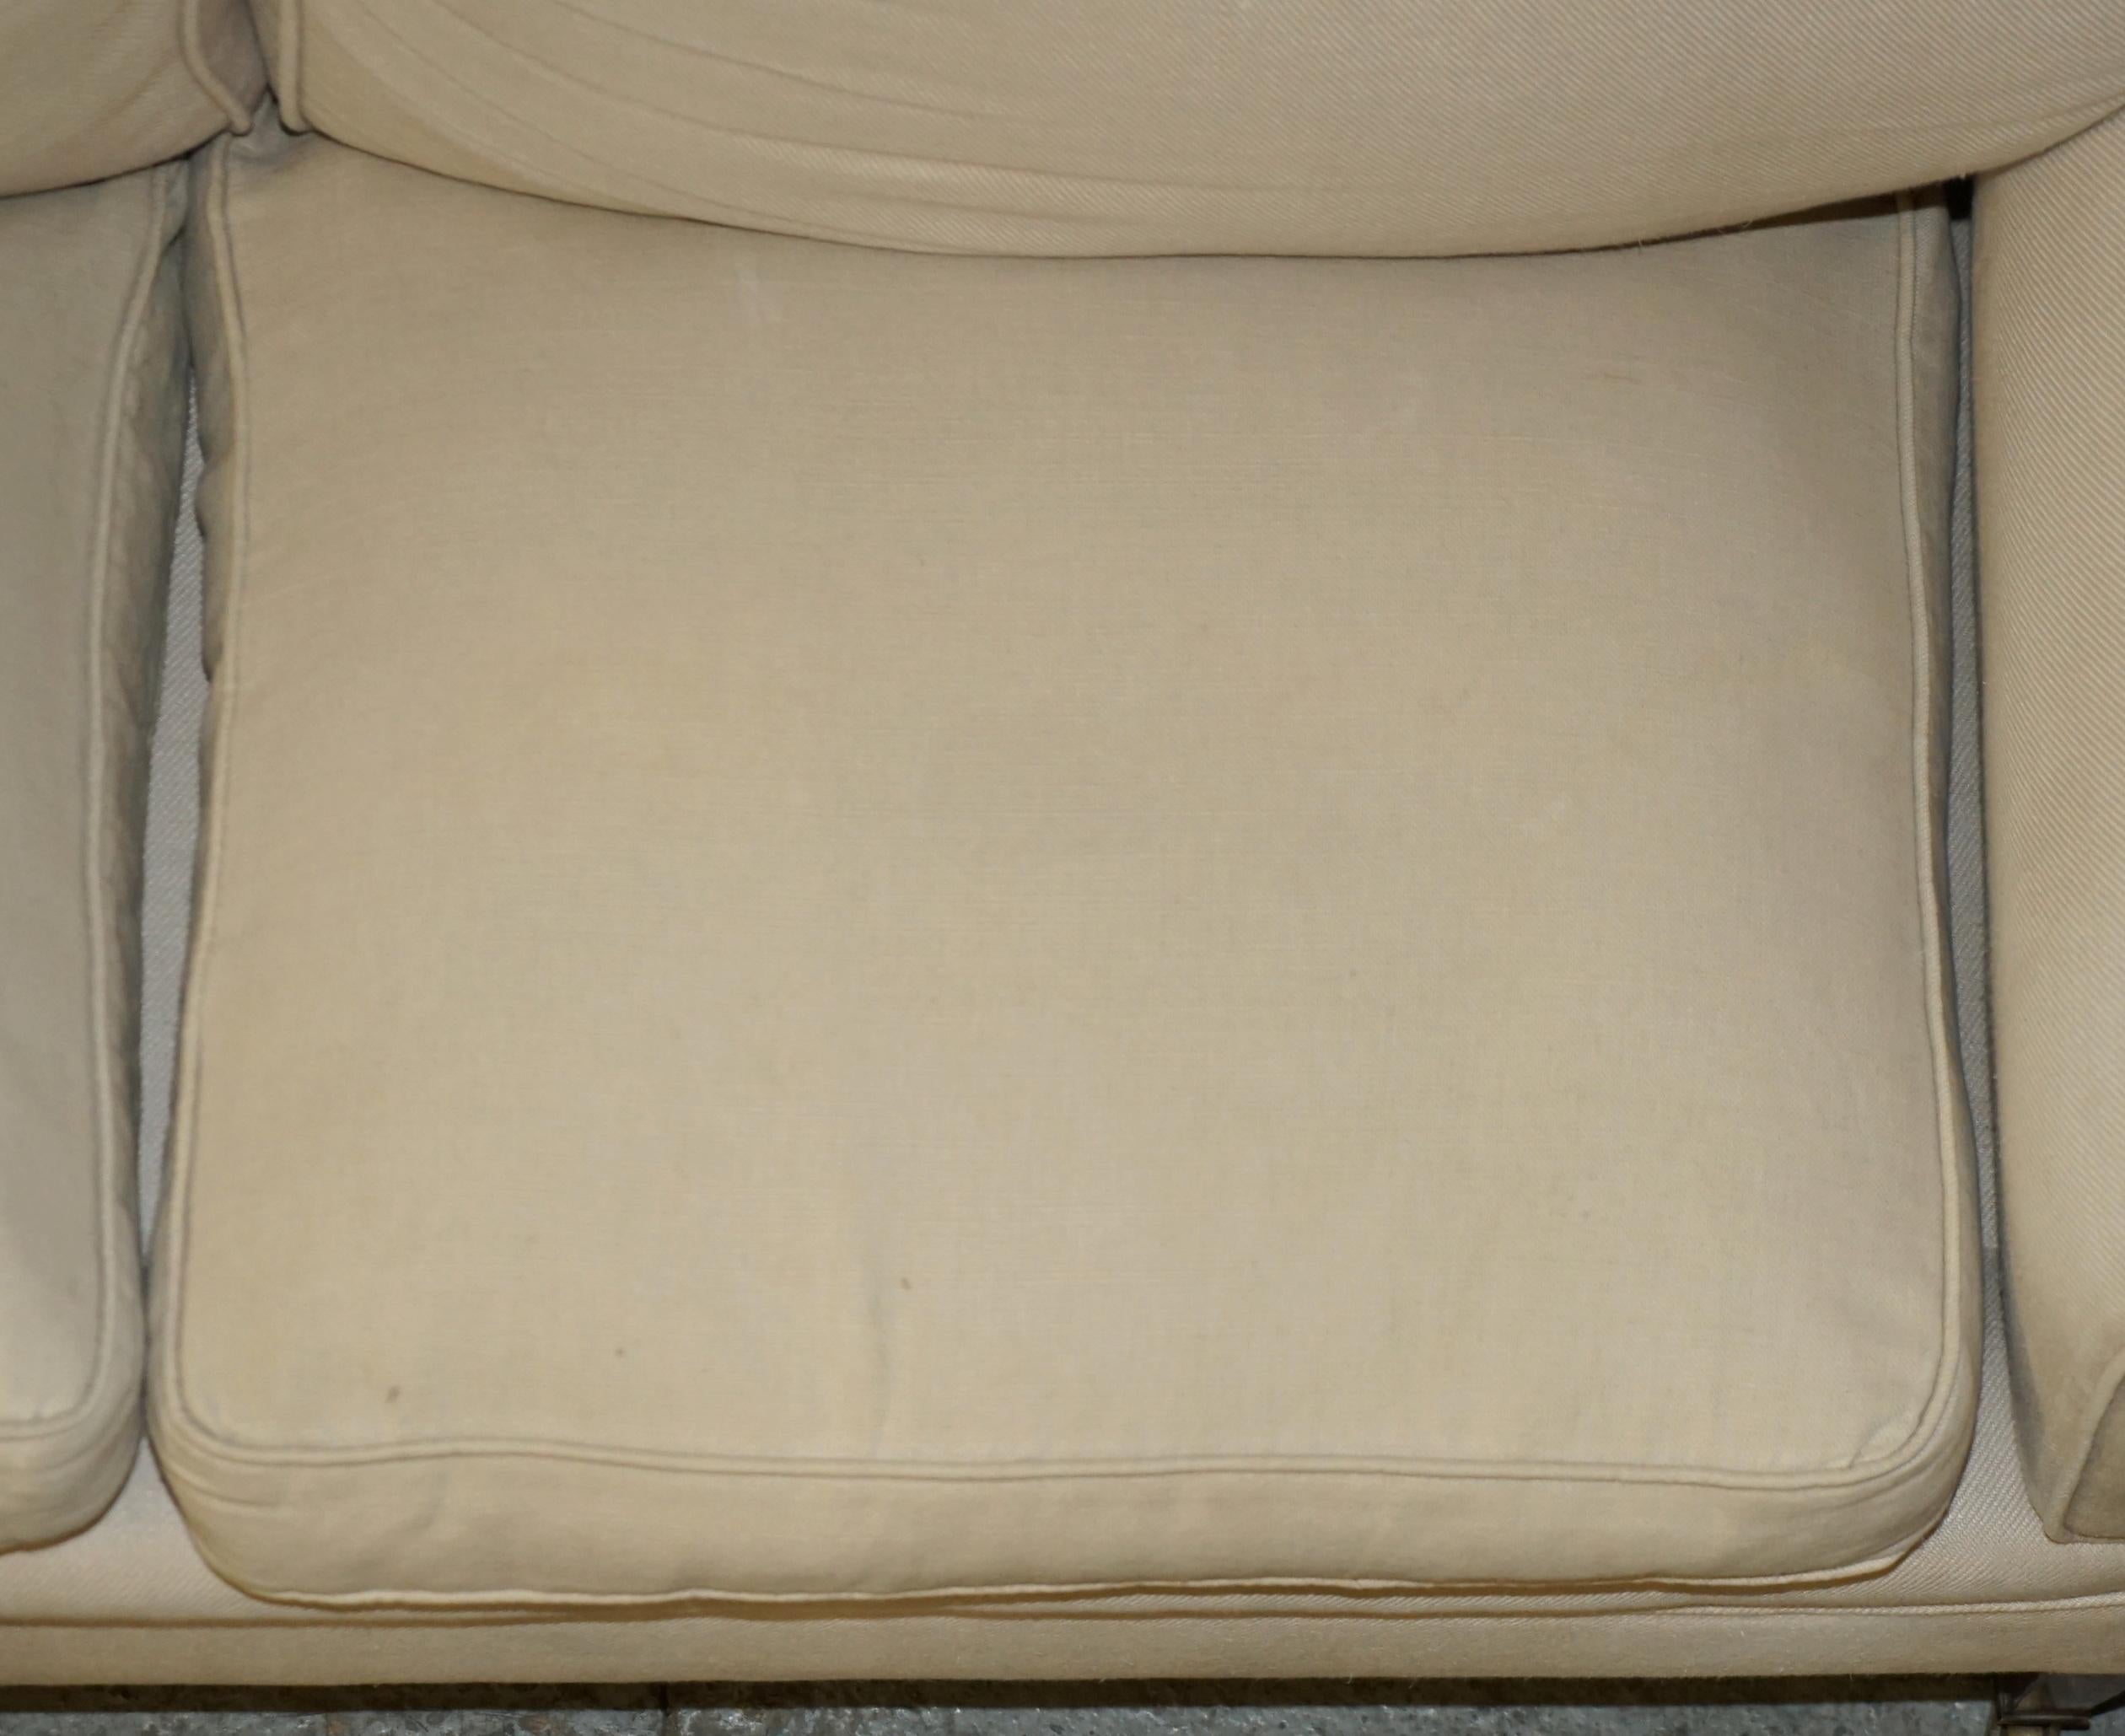 ANTIQUE ViCTORIAN 1880 HOWARD & SON TWO SEAT SOFA STAMPED READY FOR UPHOLSTERY im Angebot 9